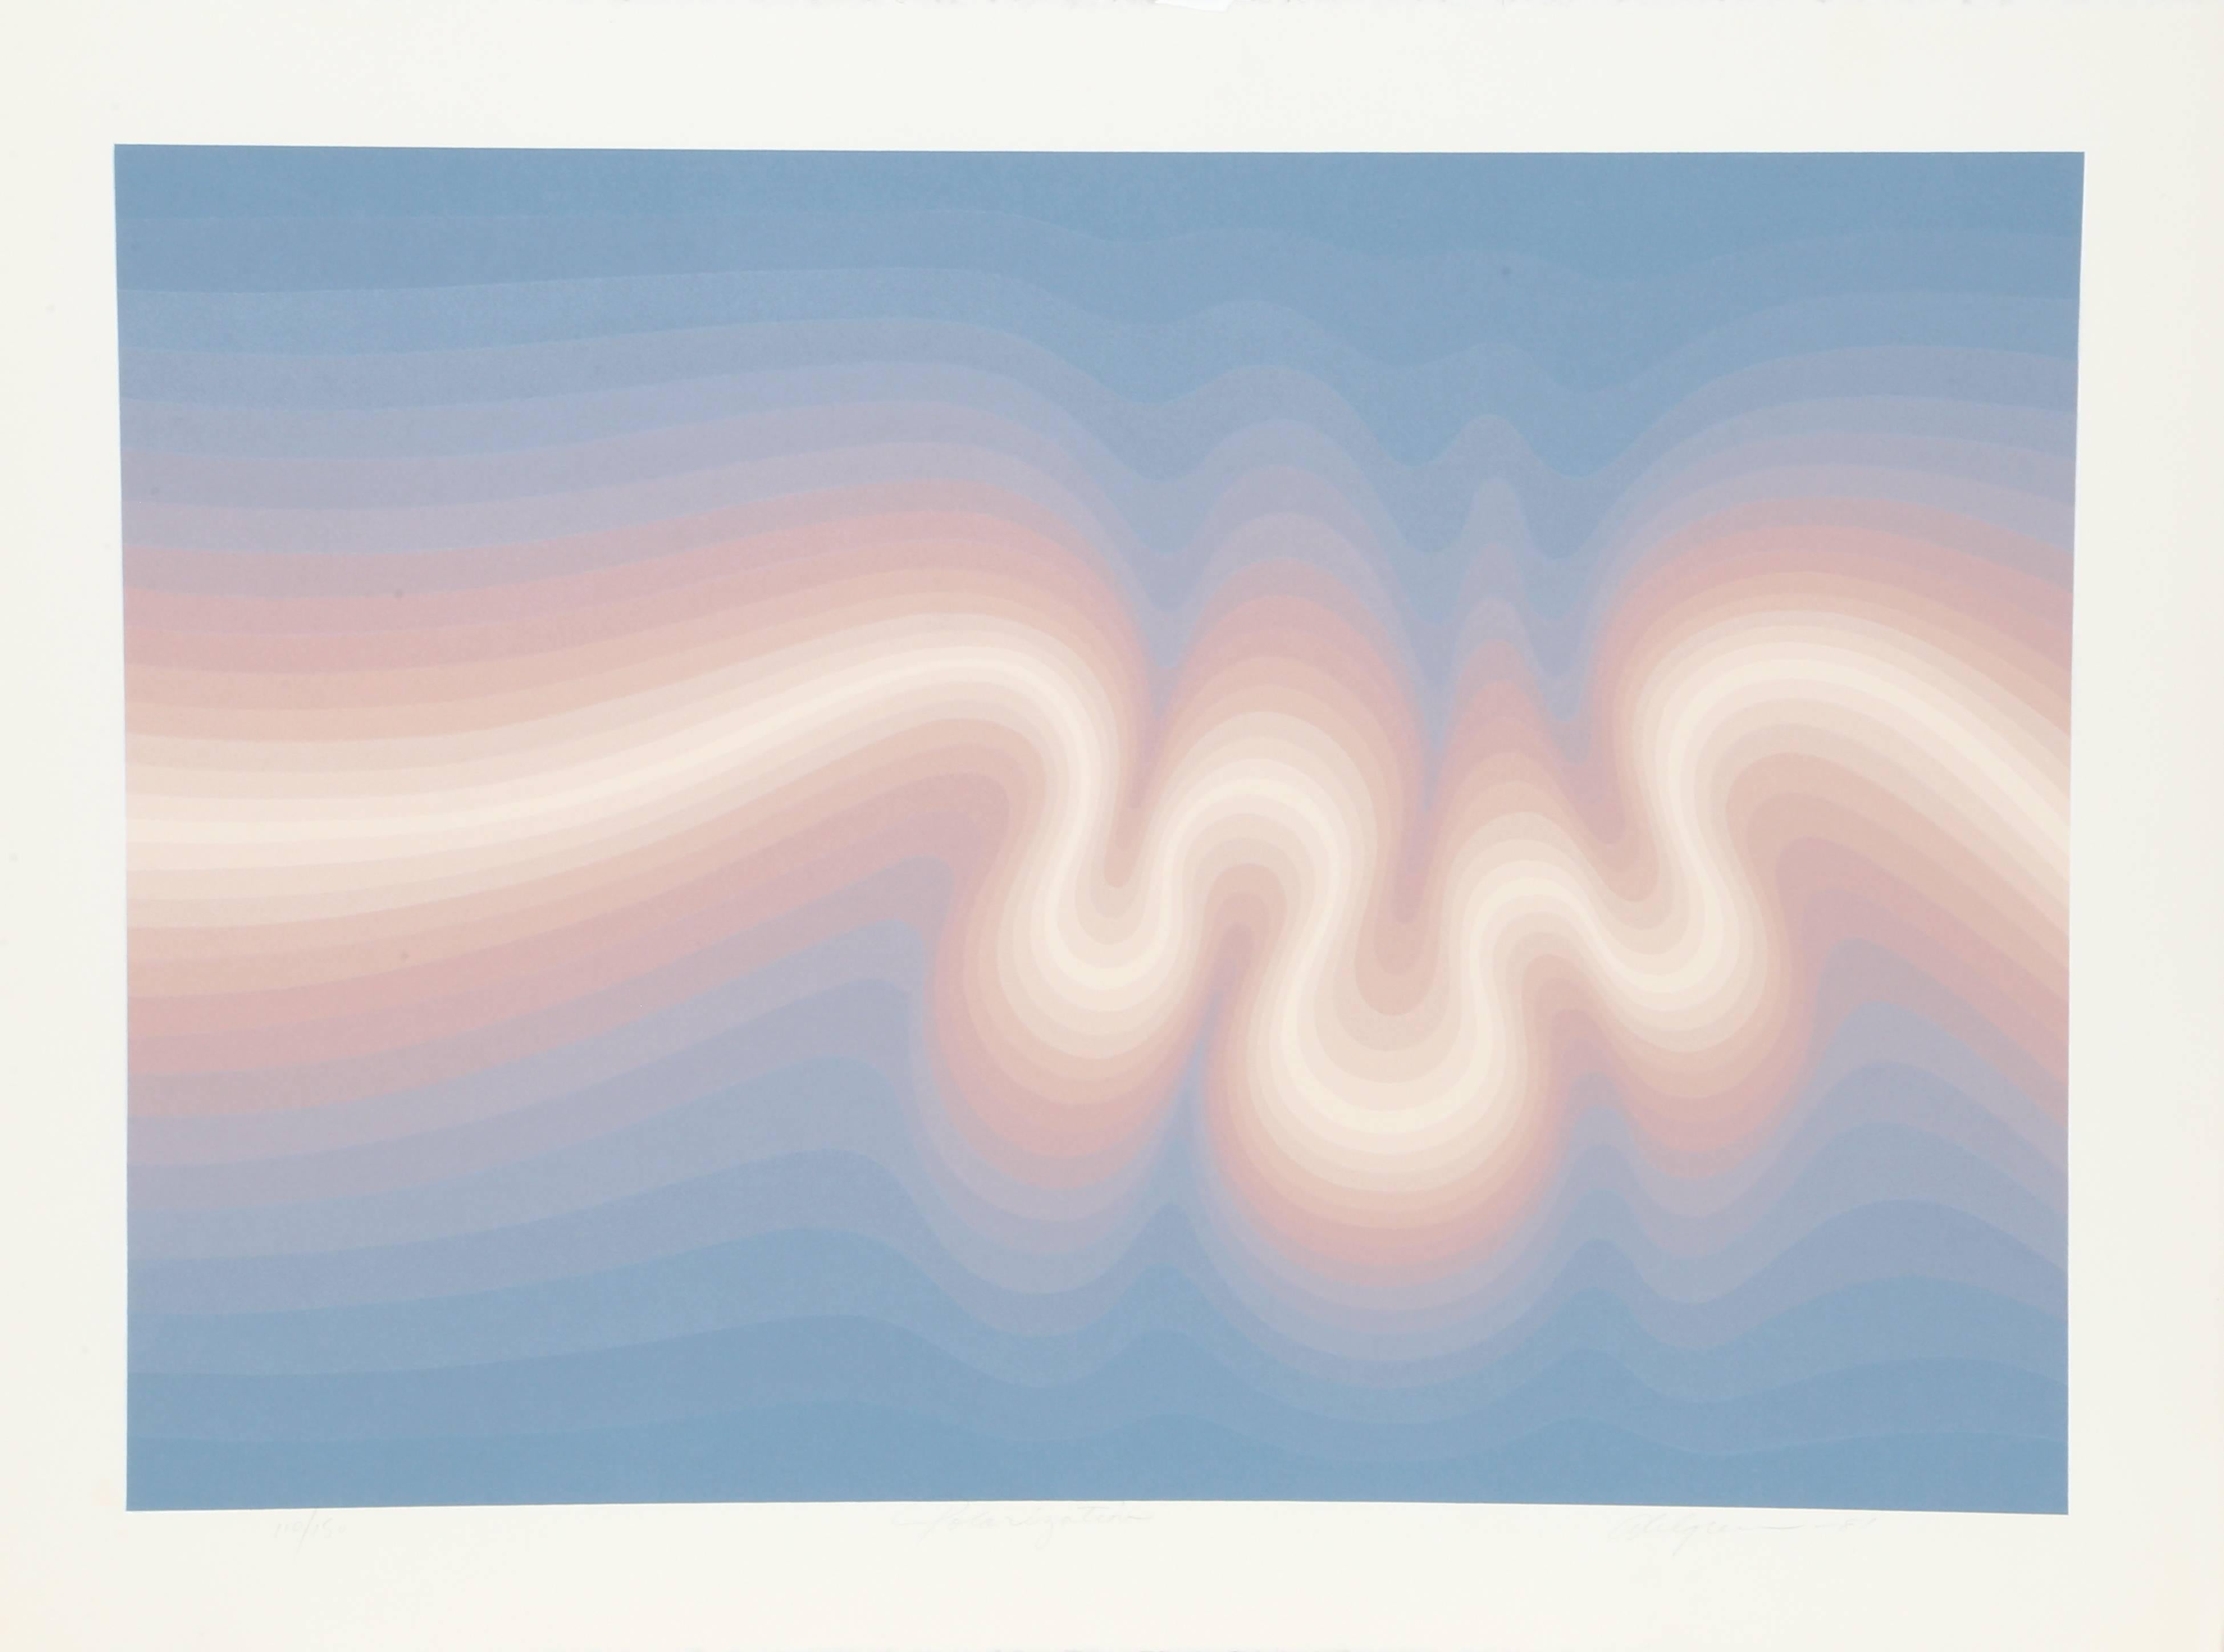 Artist: Roy Ahlgren, American (1927 - 2011)
Title: Polarization
Year: 1981
Medium: Screenprint, signed and numbered in pencil
Edition: 150
Image Size: 18 x 25 inches
Size: 22 x 29.5 in. (55.88 x 74.93 cm)